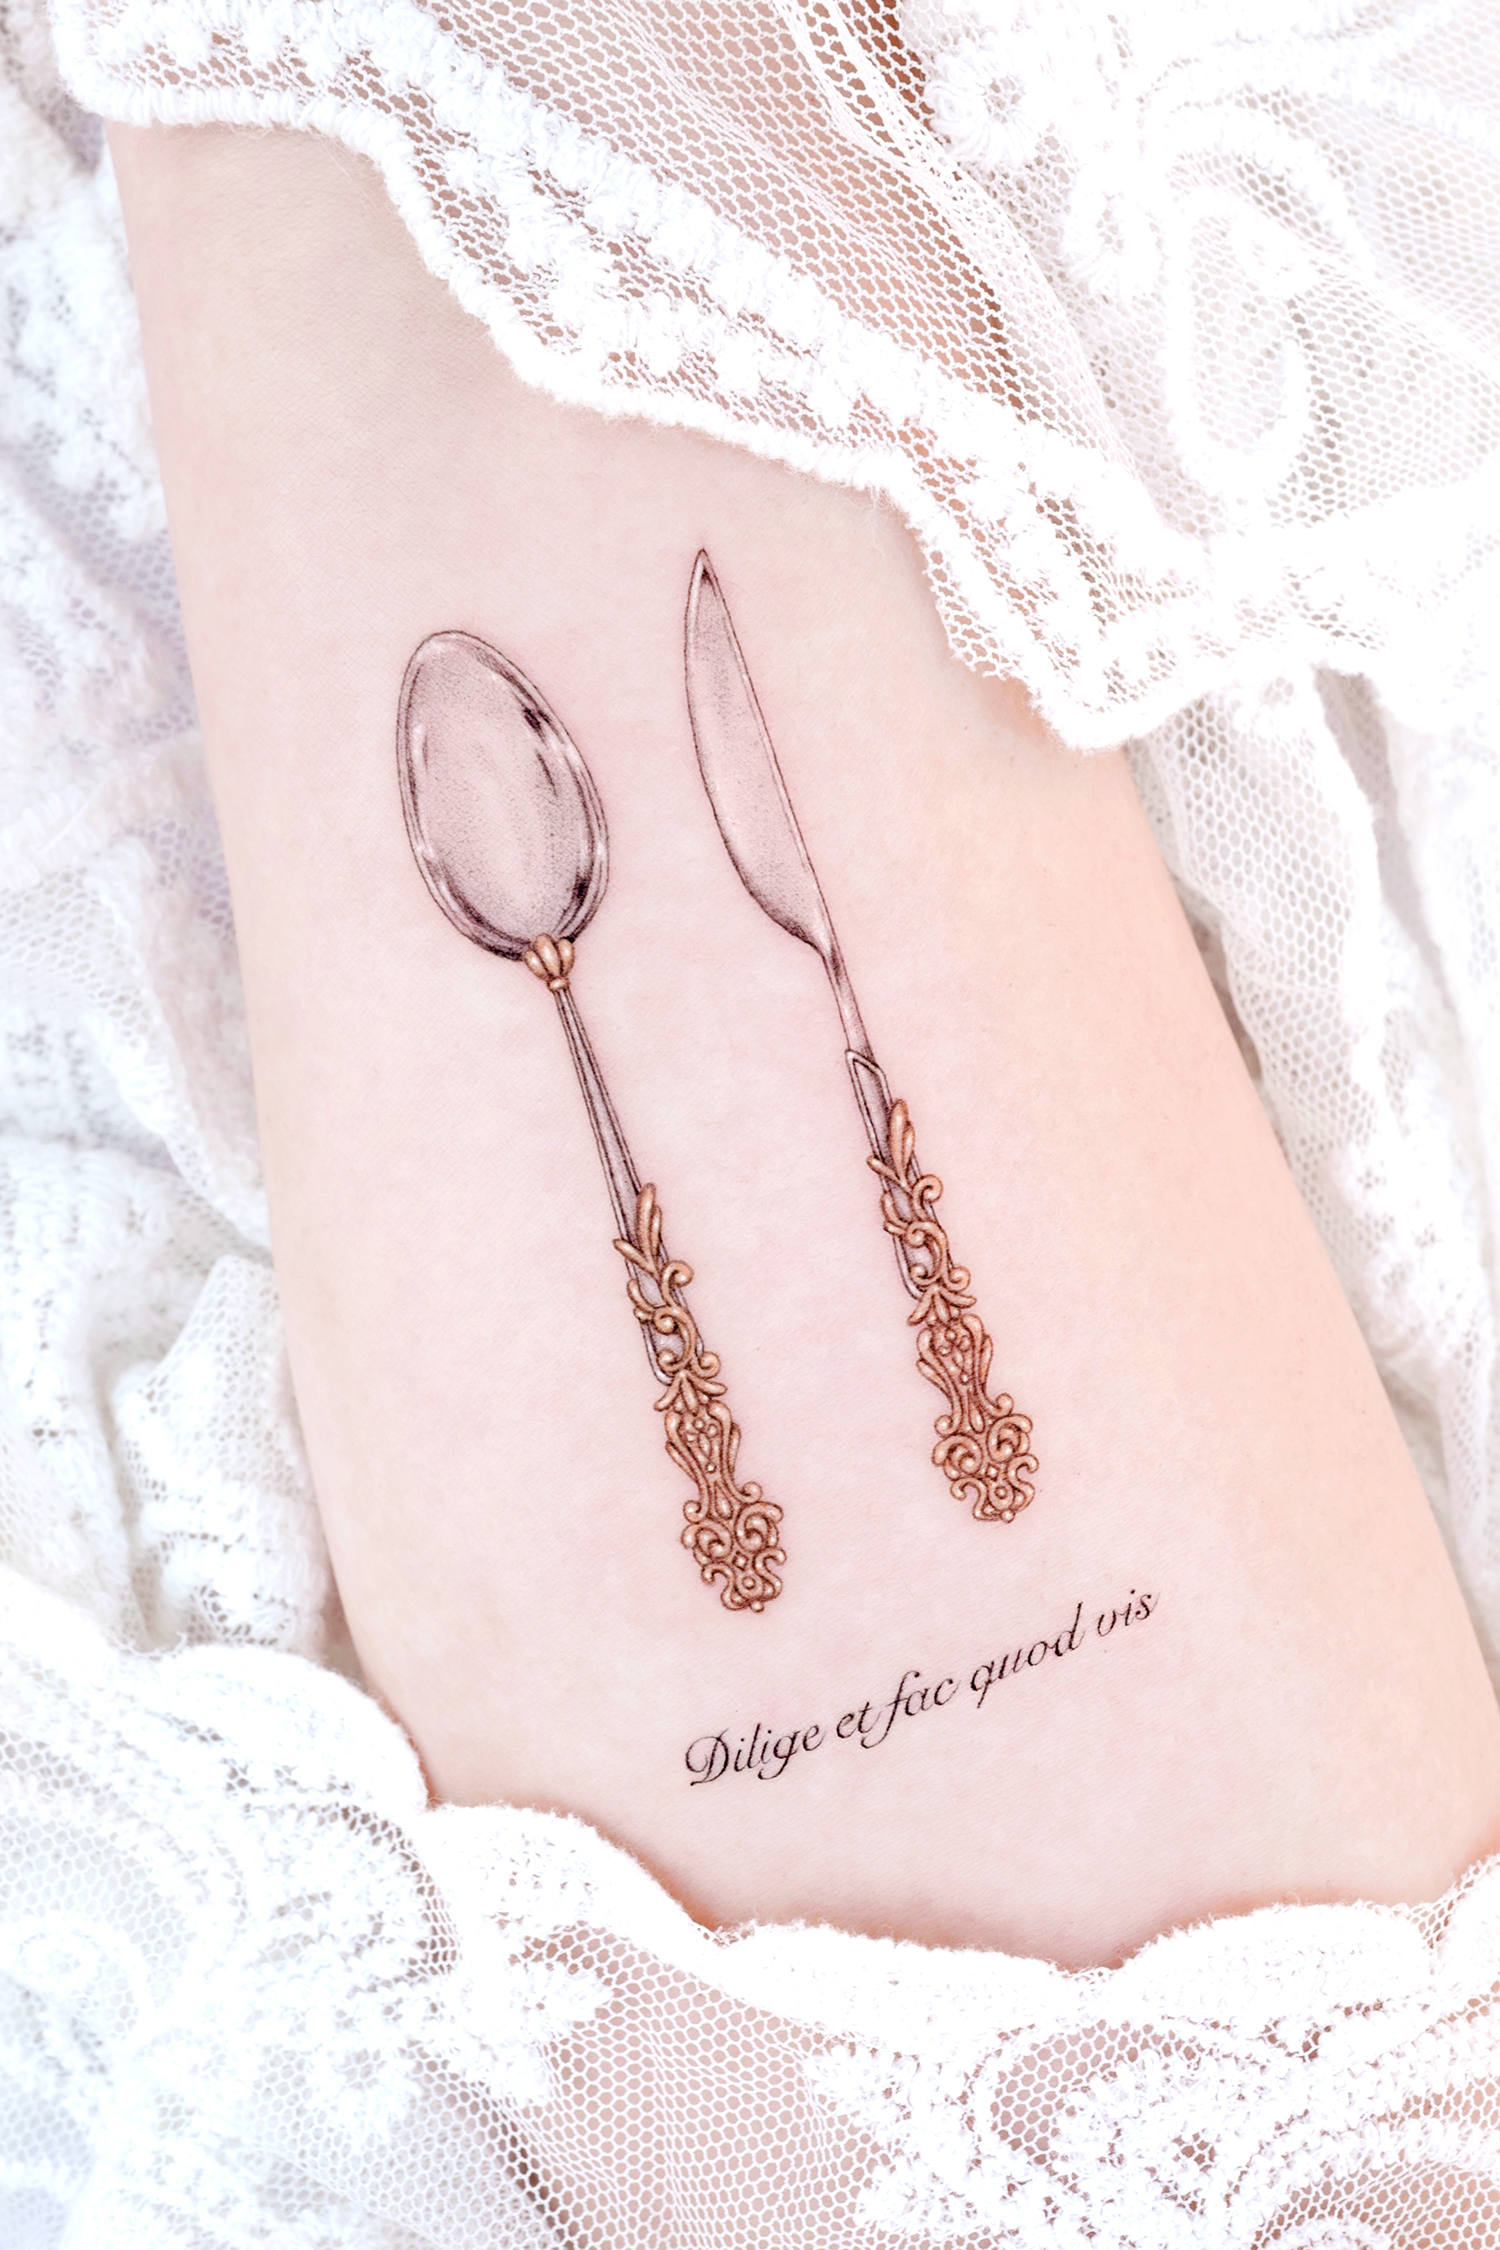 A tattoo of old silver utensils, by Solar
